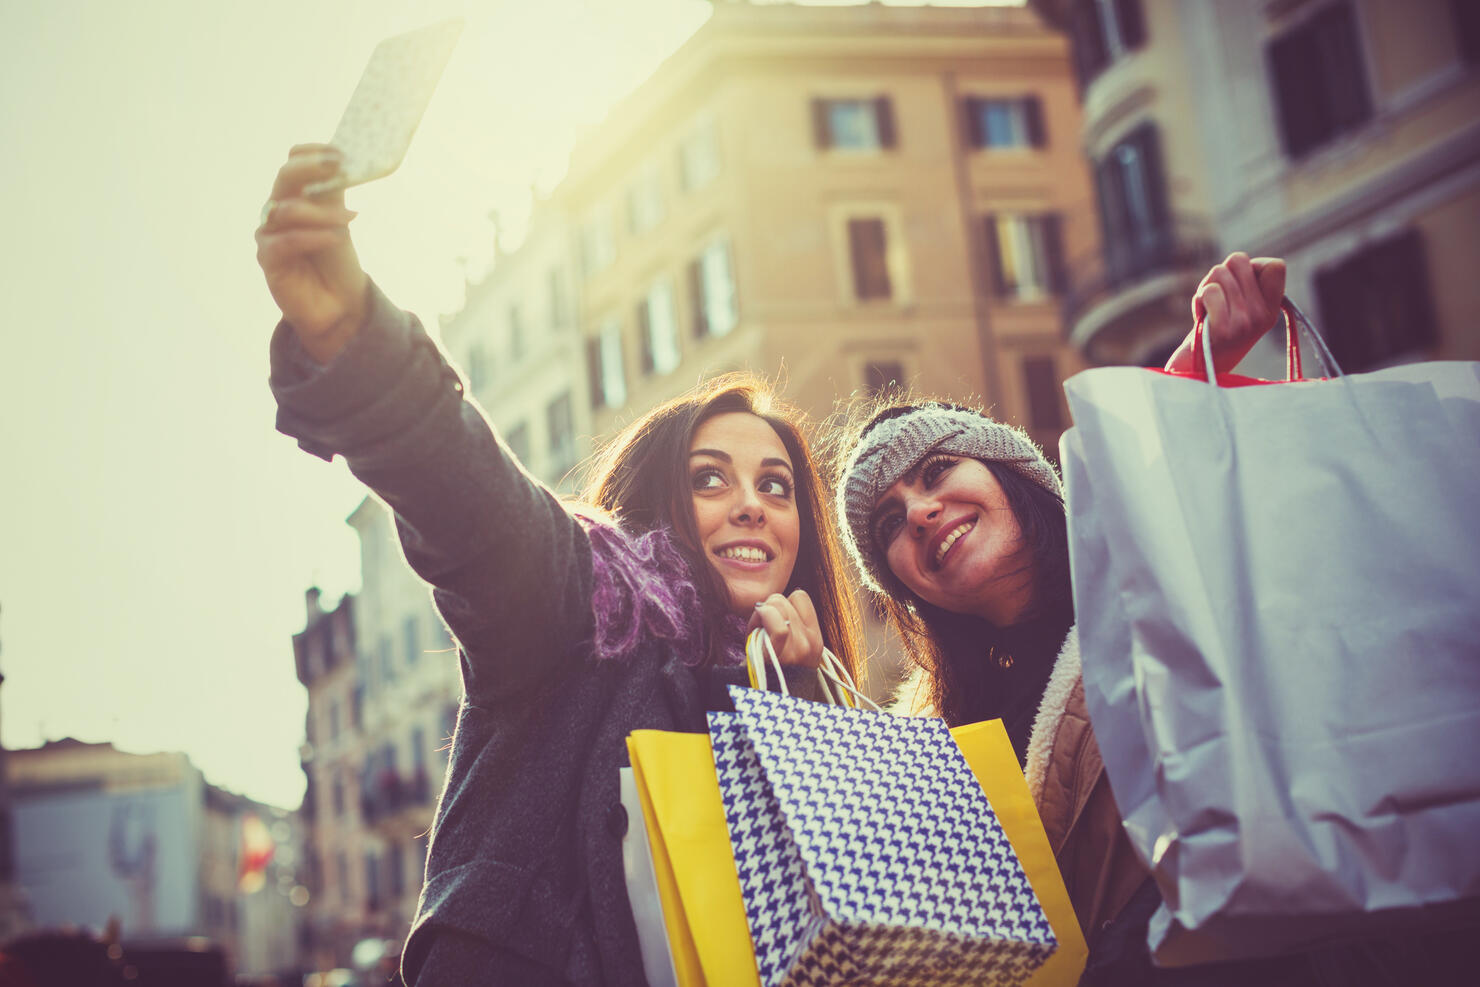 Women take a selfie during christmas shopping in Rome